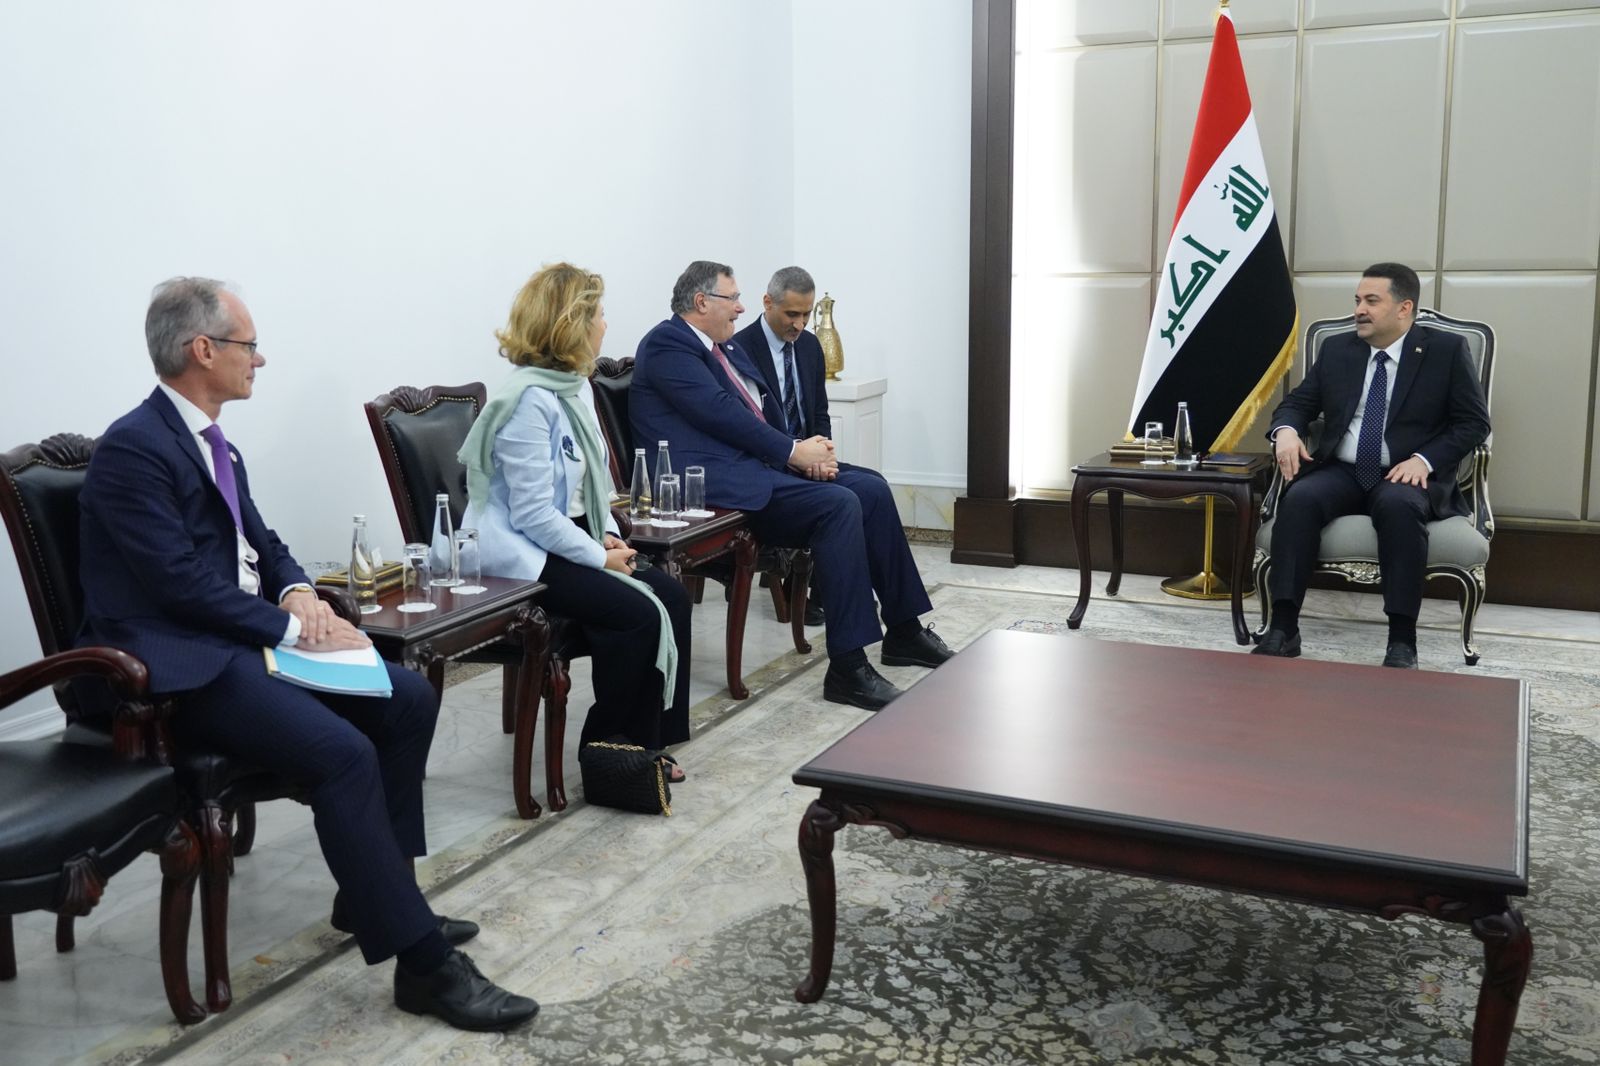 Iraq's Prime Minister Welcomes TotalEnergies' CEO Following a Landmark $27 Billion Deal